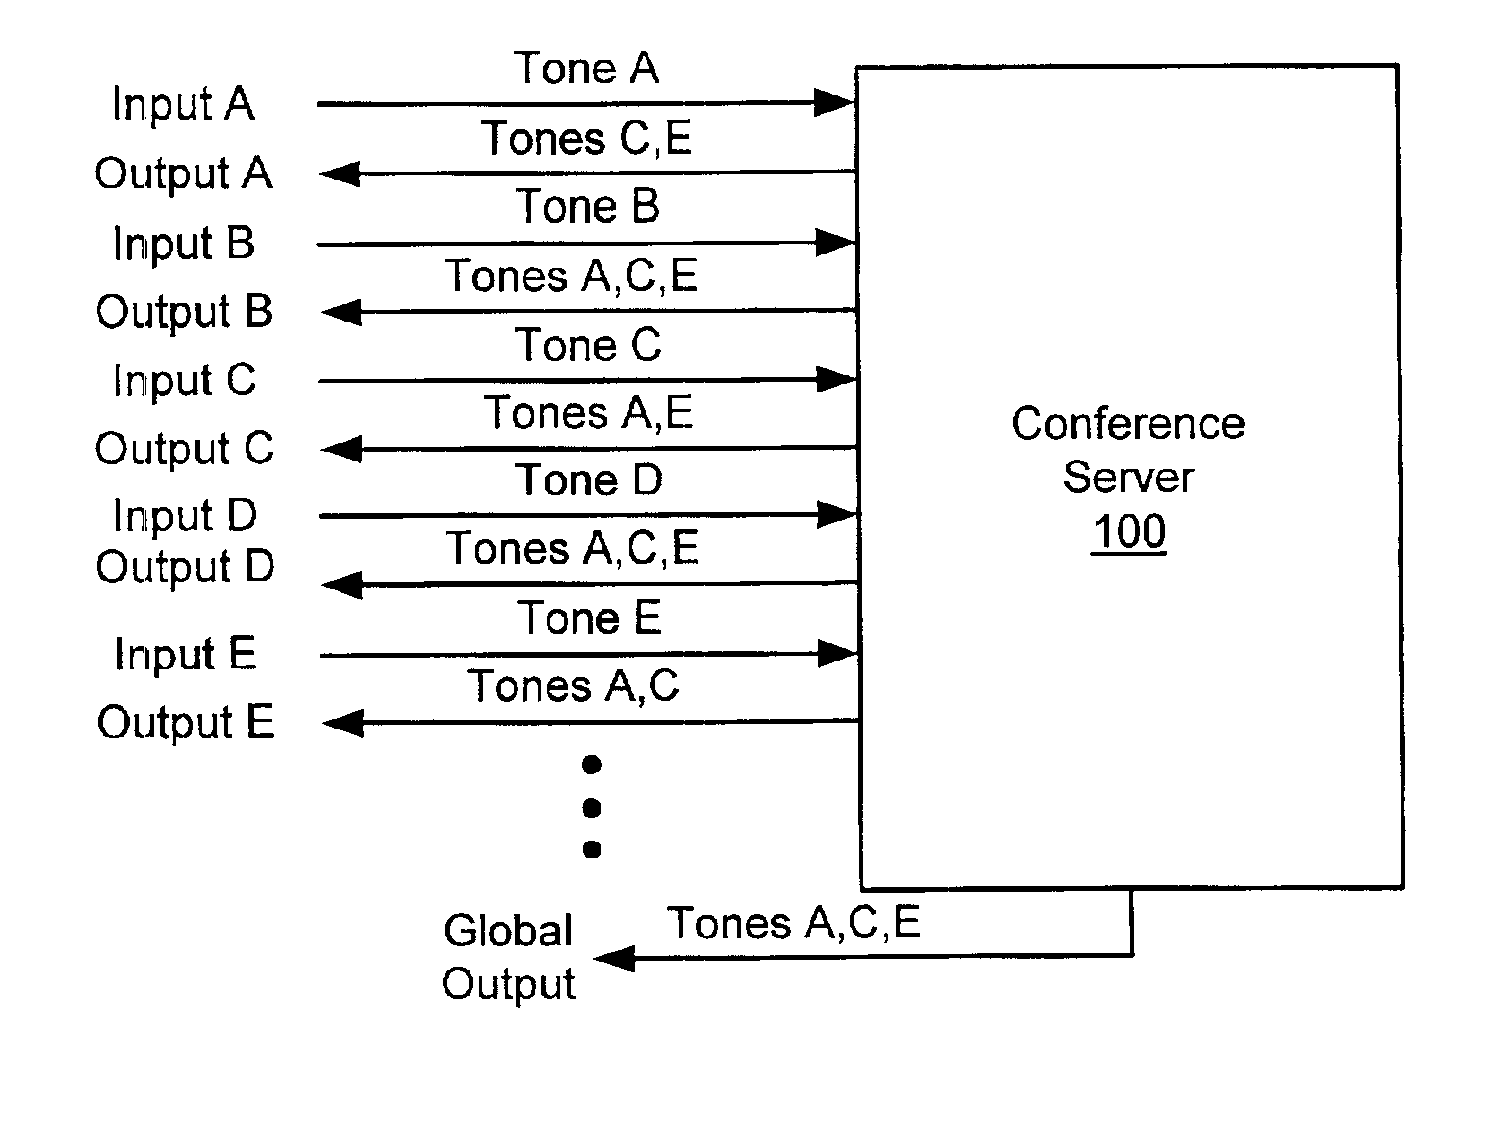 Method for testing large-scale audio conference servers